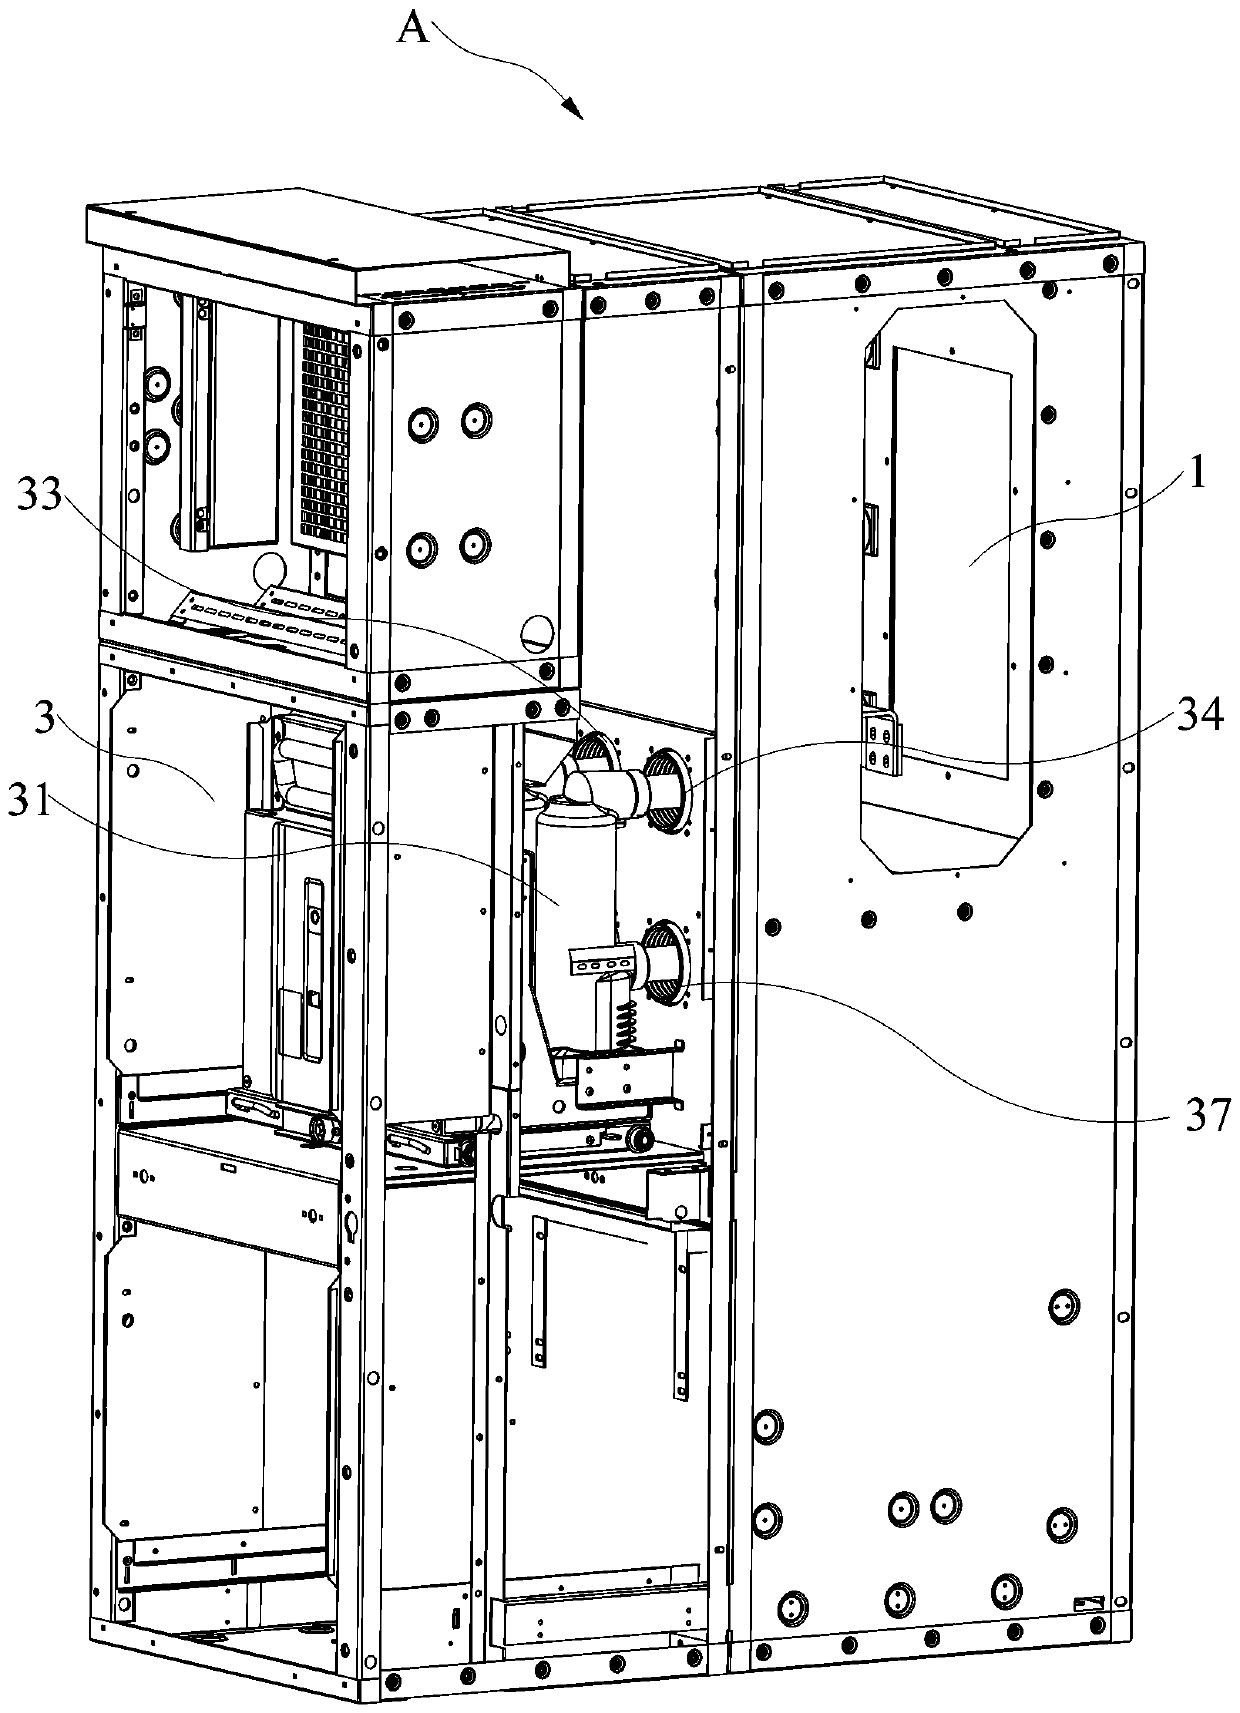 High-voltage switch cabinet structure